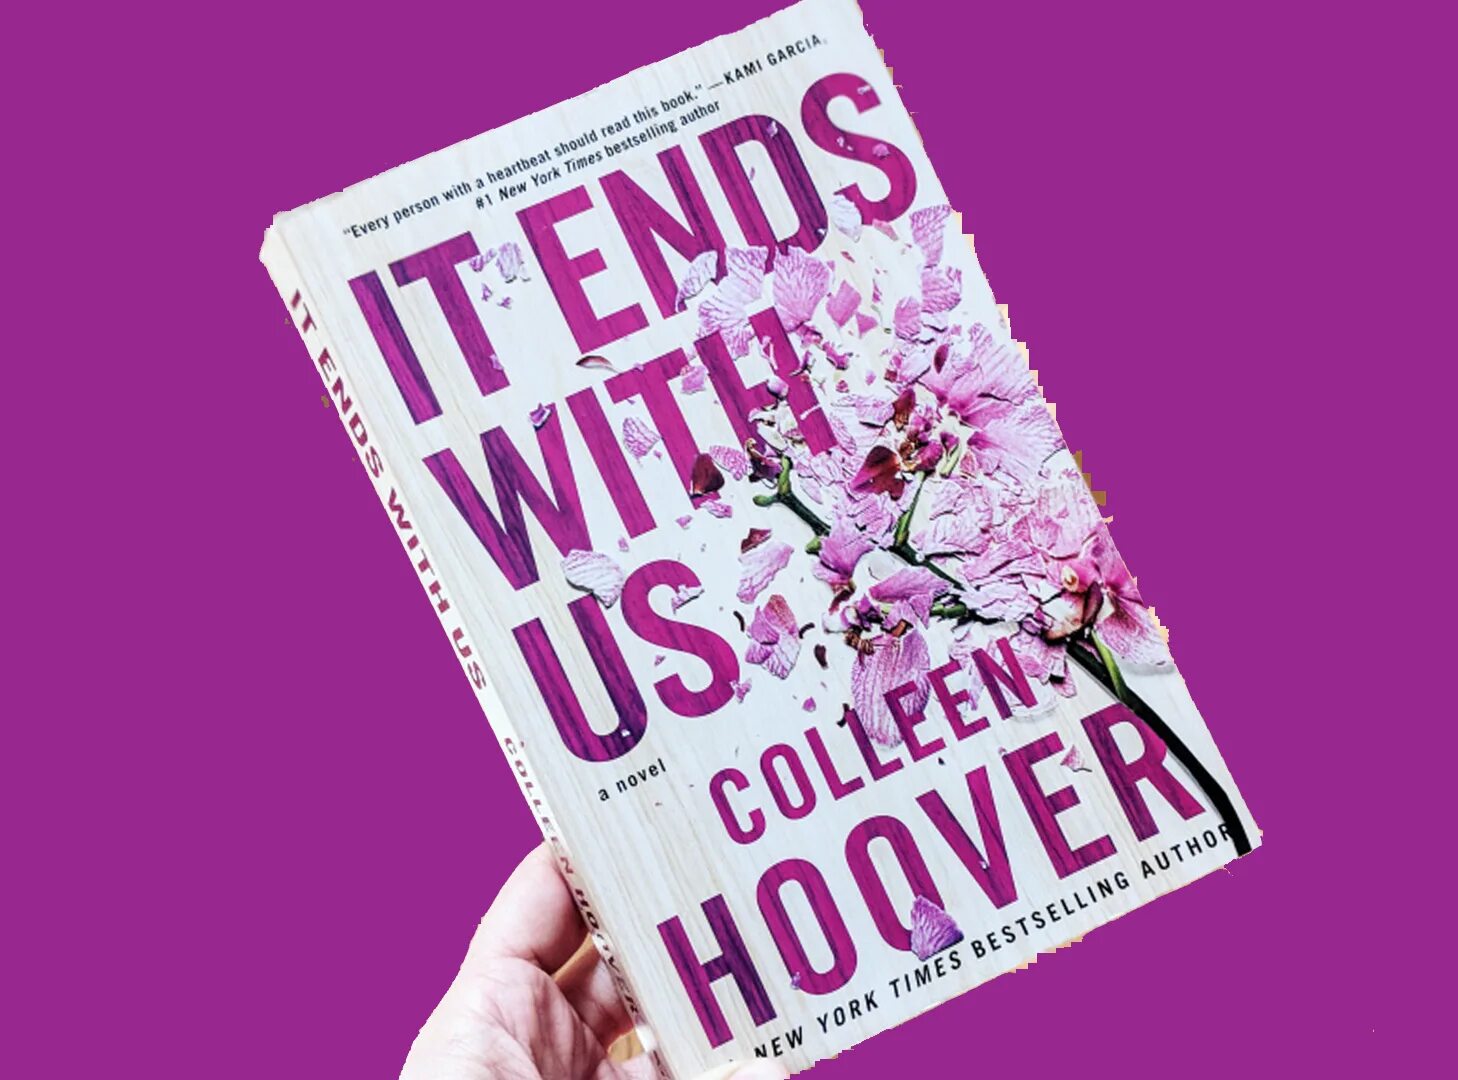 This book yet. It ends with us Colleen Hoover книга. It ends with us Коллин Хувер. It ends with us книга. It ends with us Коллин Хувер книга.